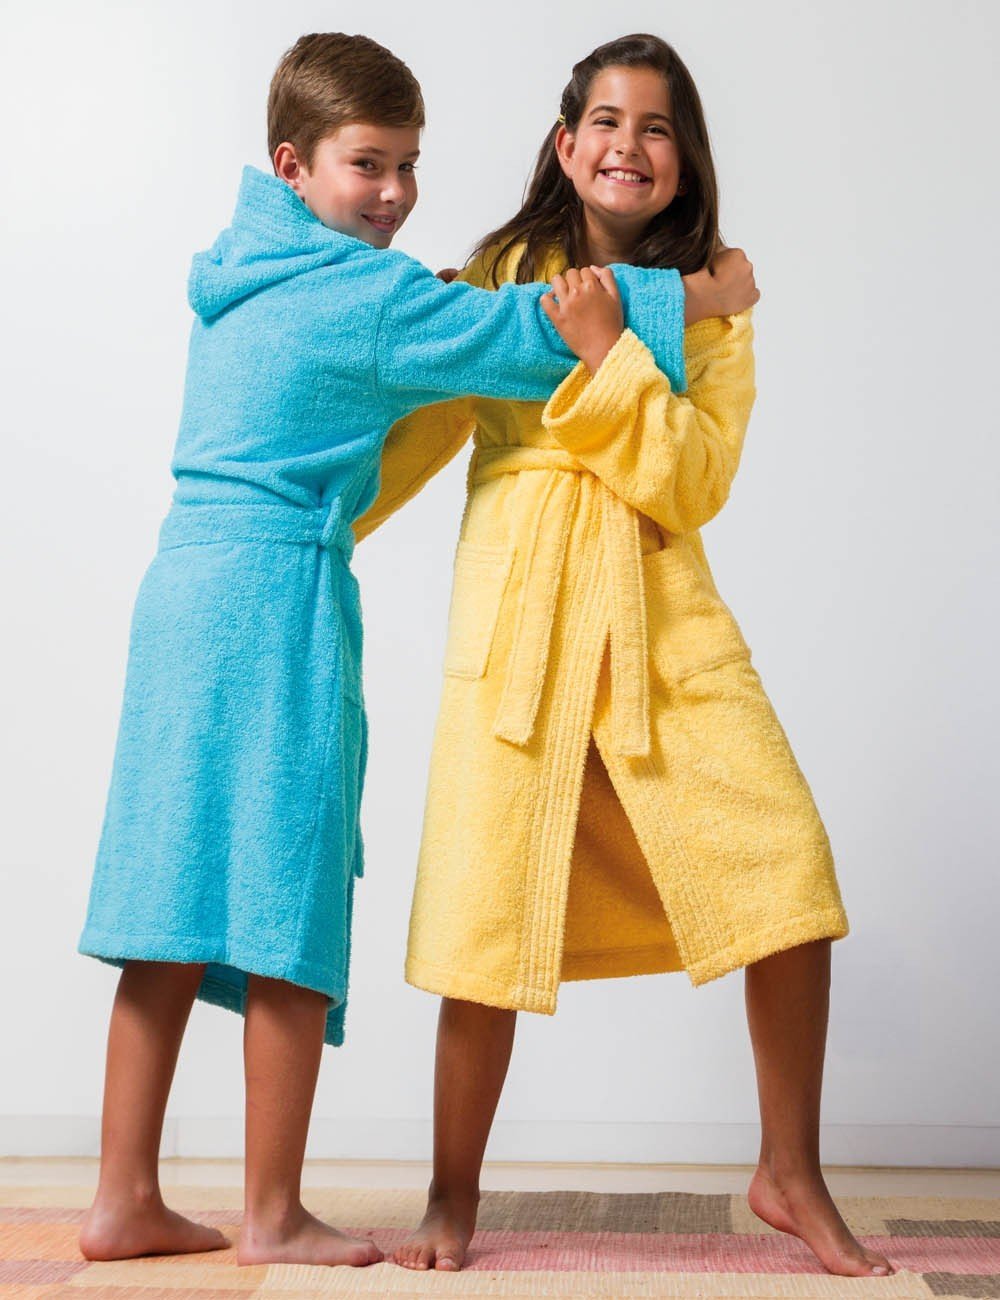 This bathrobes for children are available for ages 2 to 13 years.